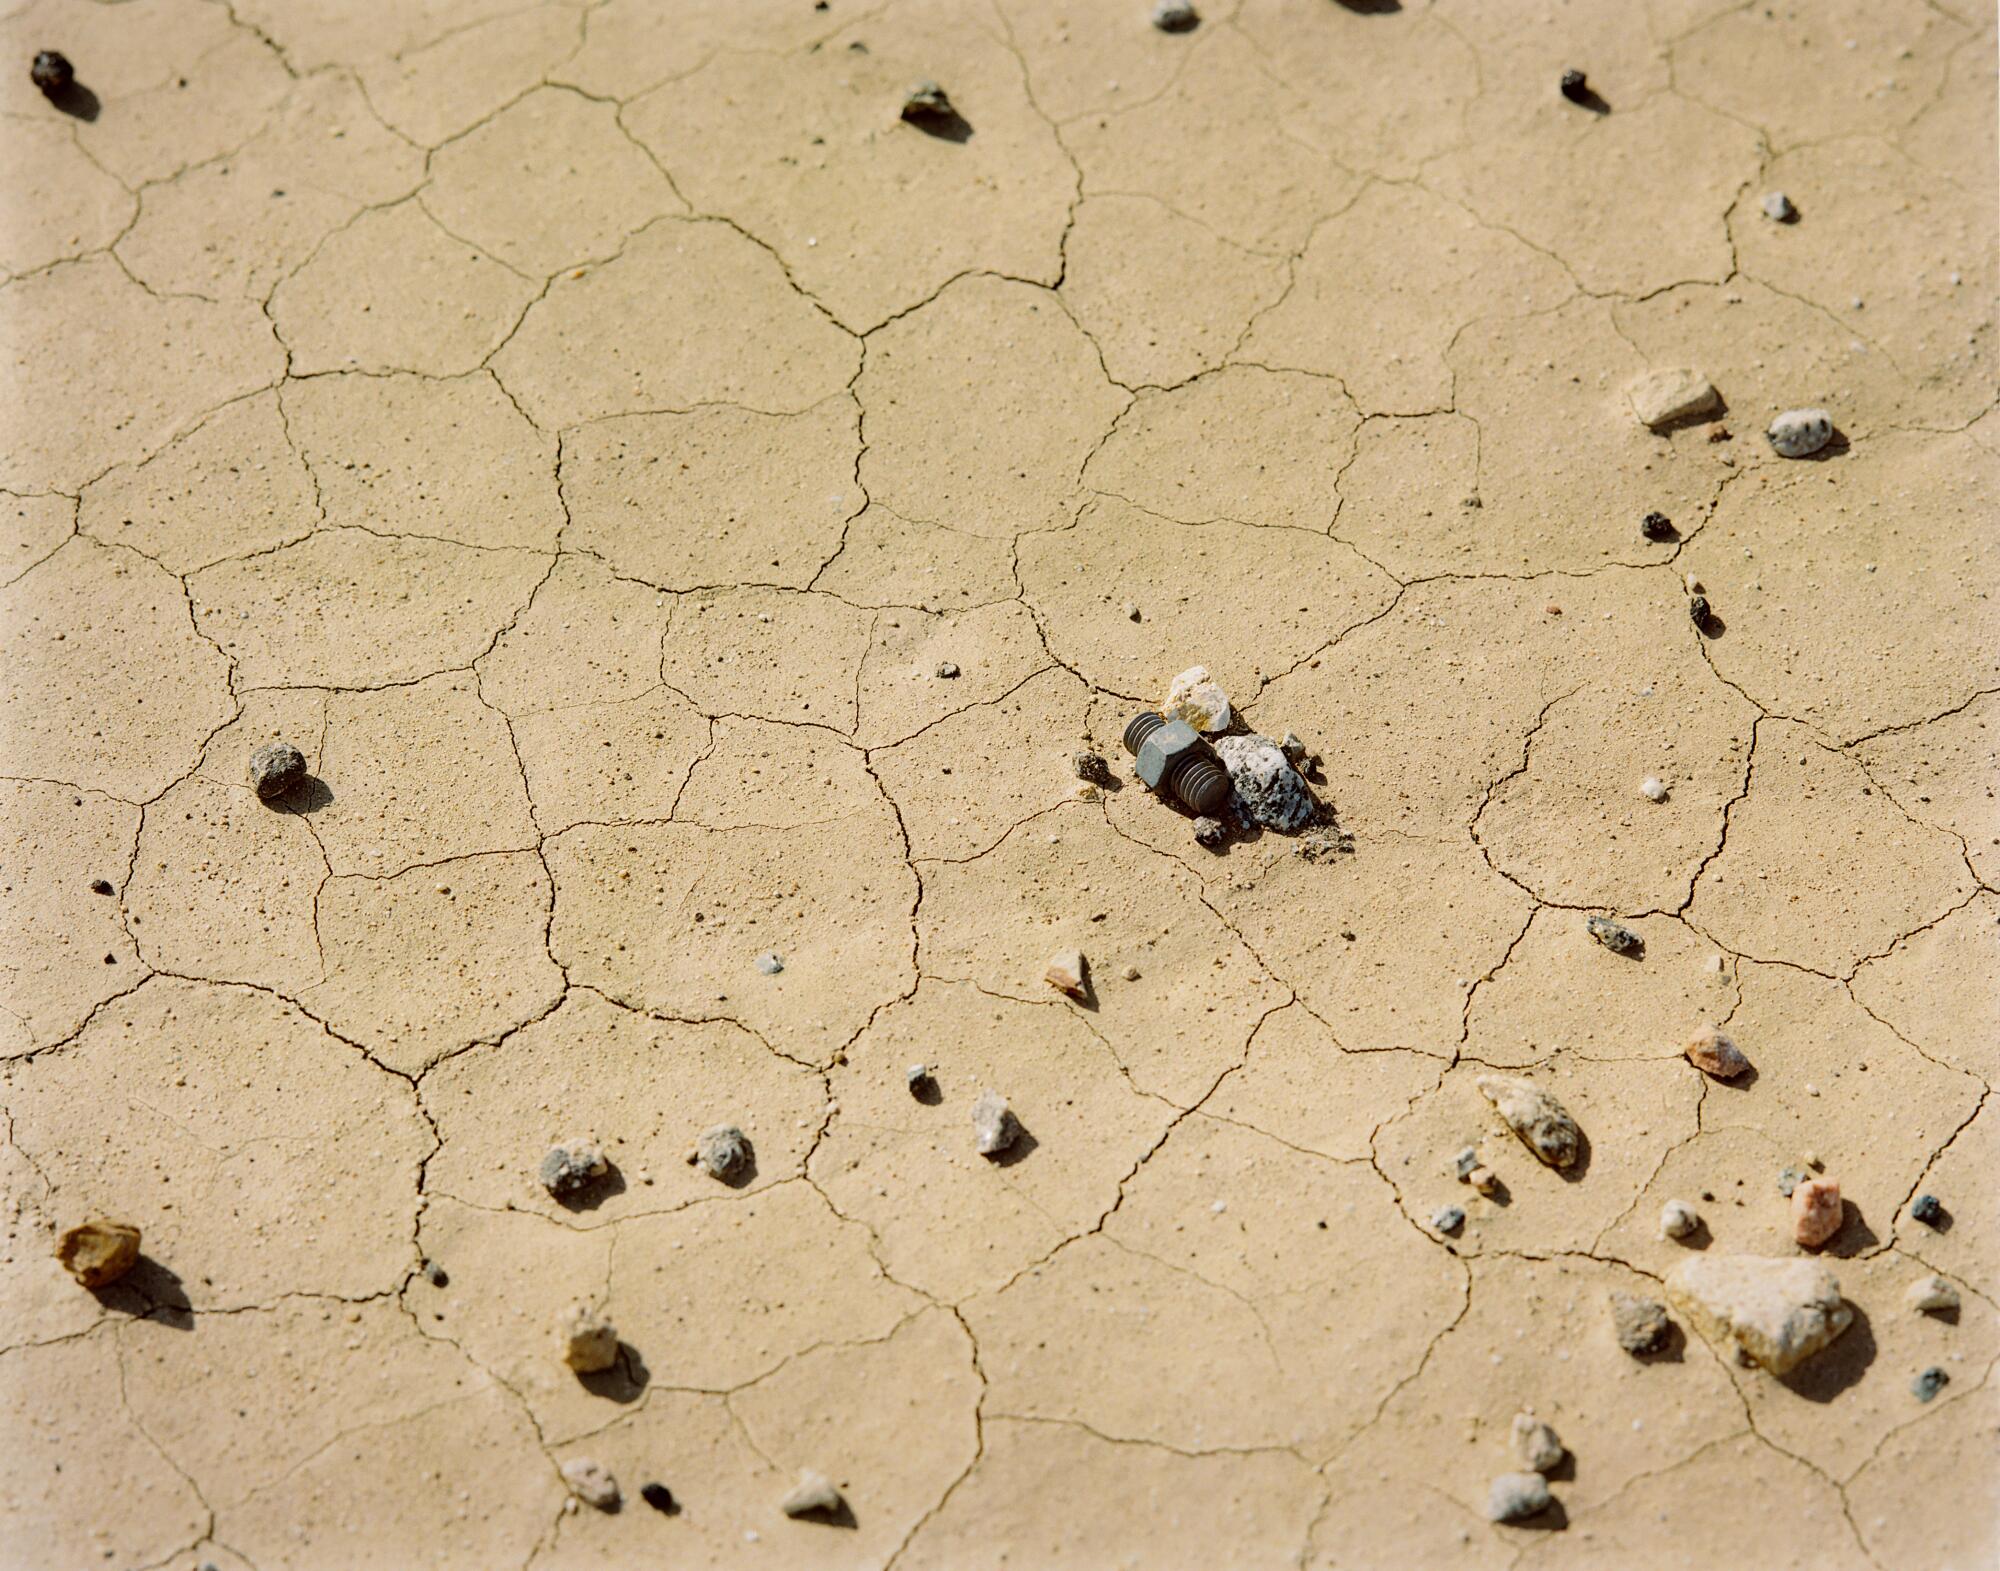 Detritus on a parched, cracked ground.